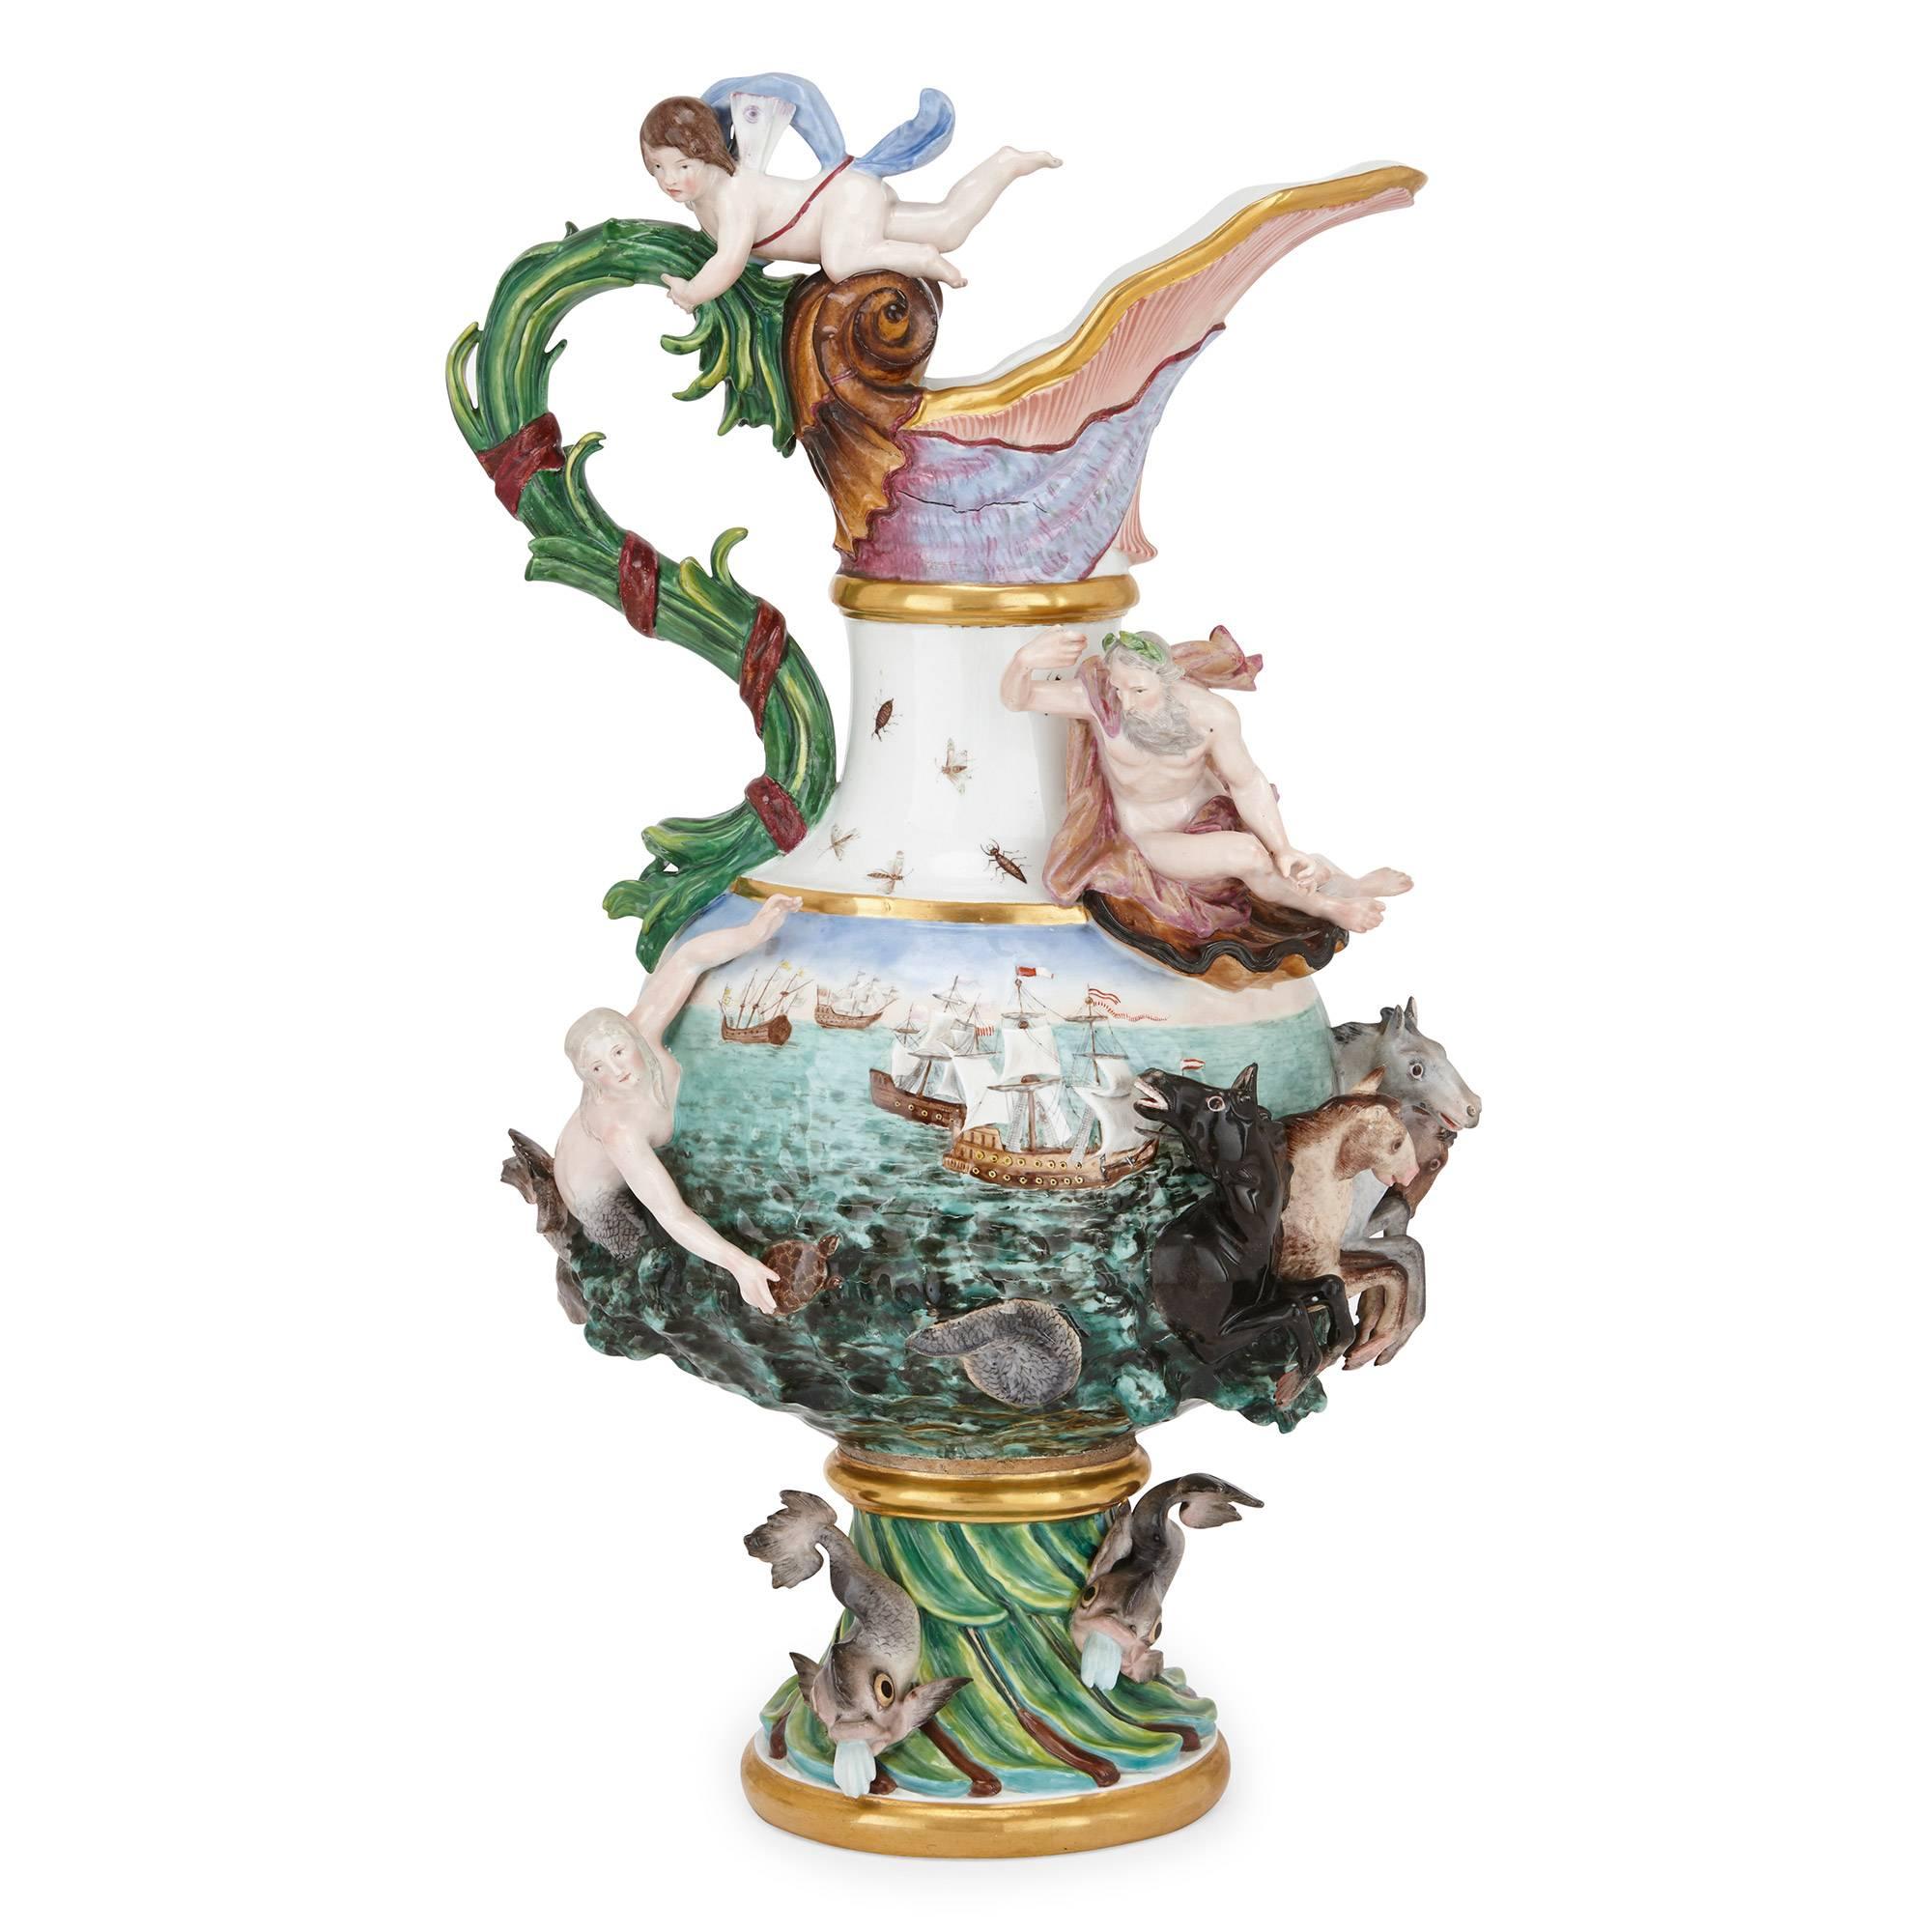 This exquisite Meissen porcelain ewer is after the model by Johann Joachim Kaendler (1706 - 1775), who was the chief sculptor at the Meissen porcelain factory between 1742 and 1775. One of the most famous modellers ever to have worked at Meissen,